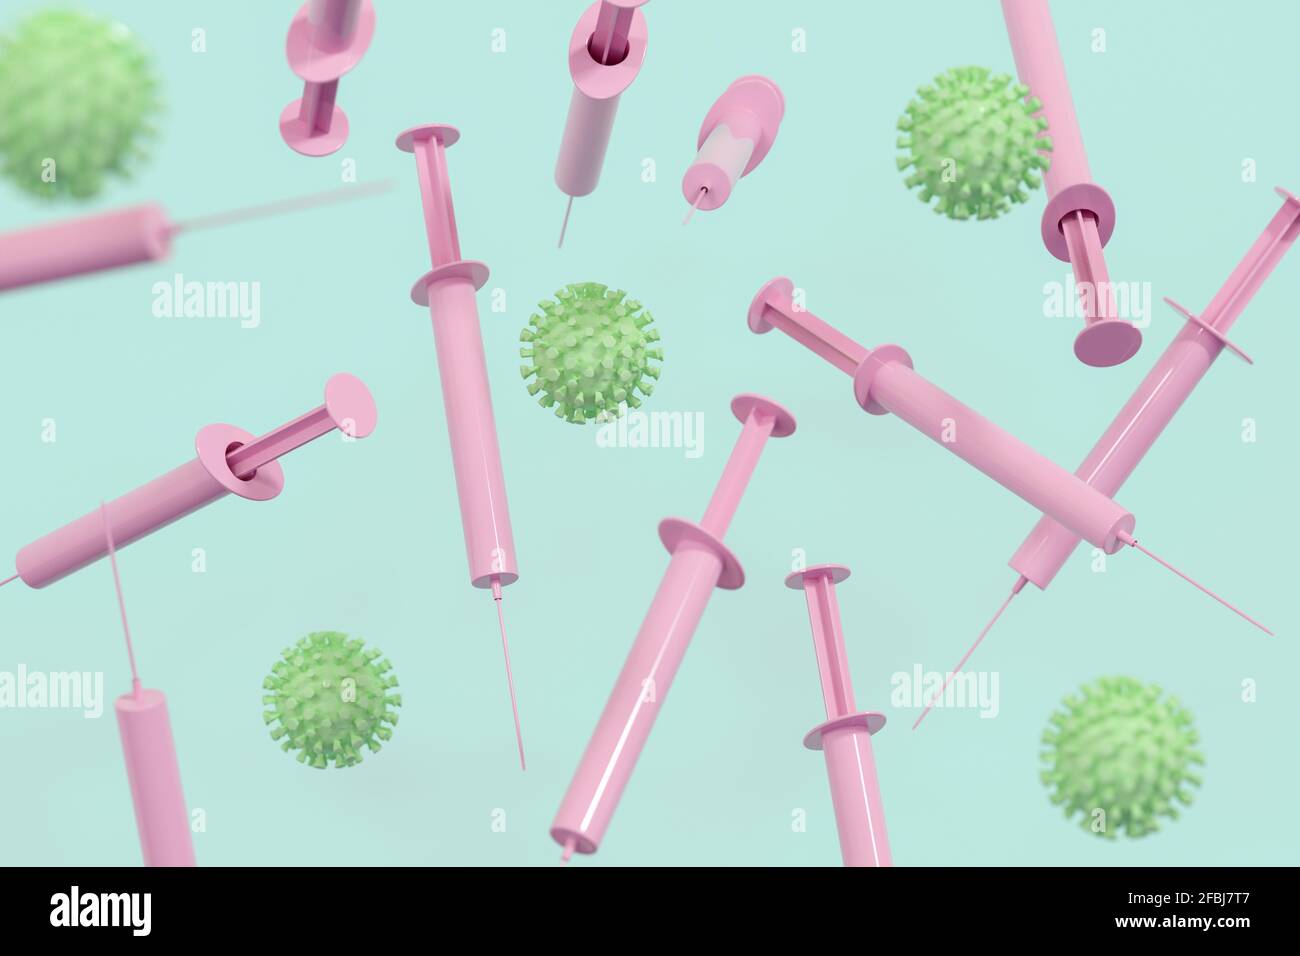 Digitally generated image of pink syringes and COVID-19 virus Stock Photo